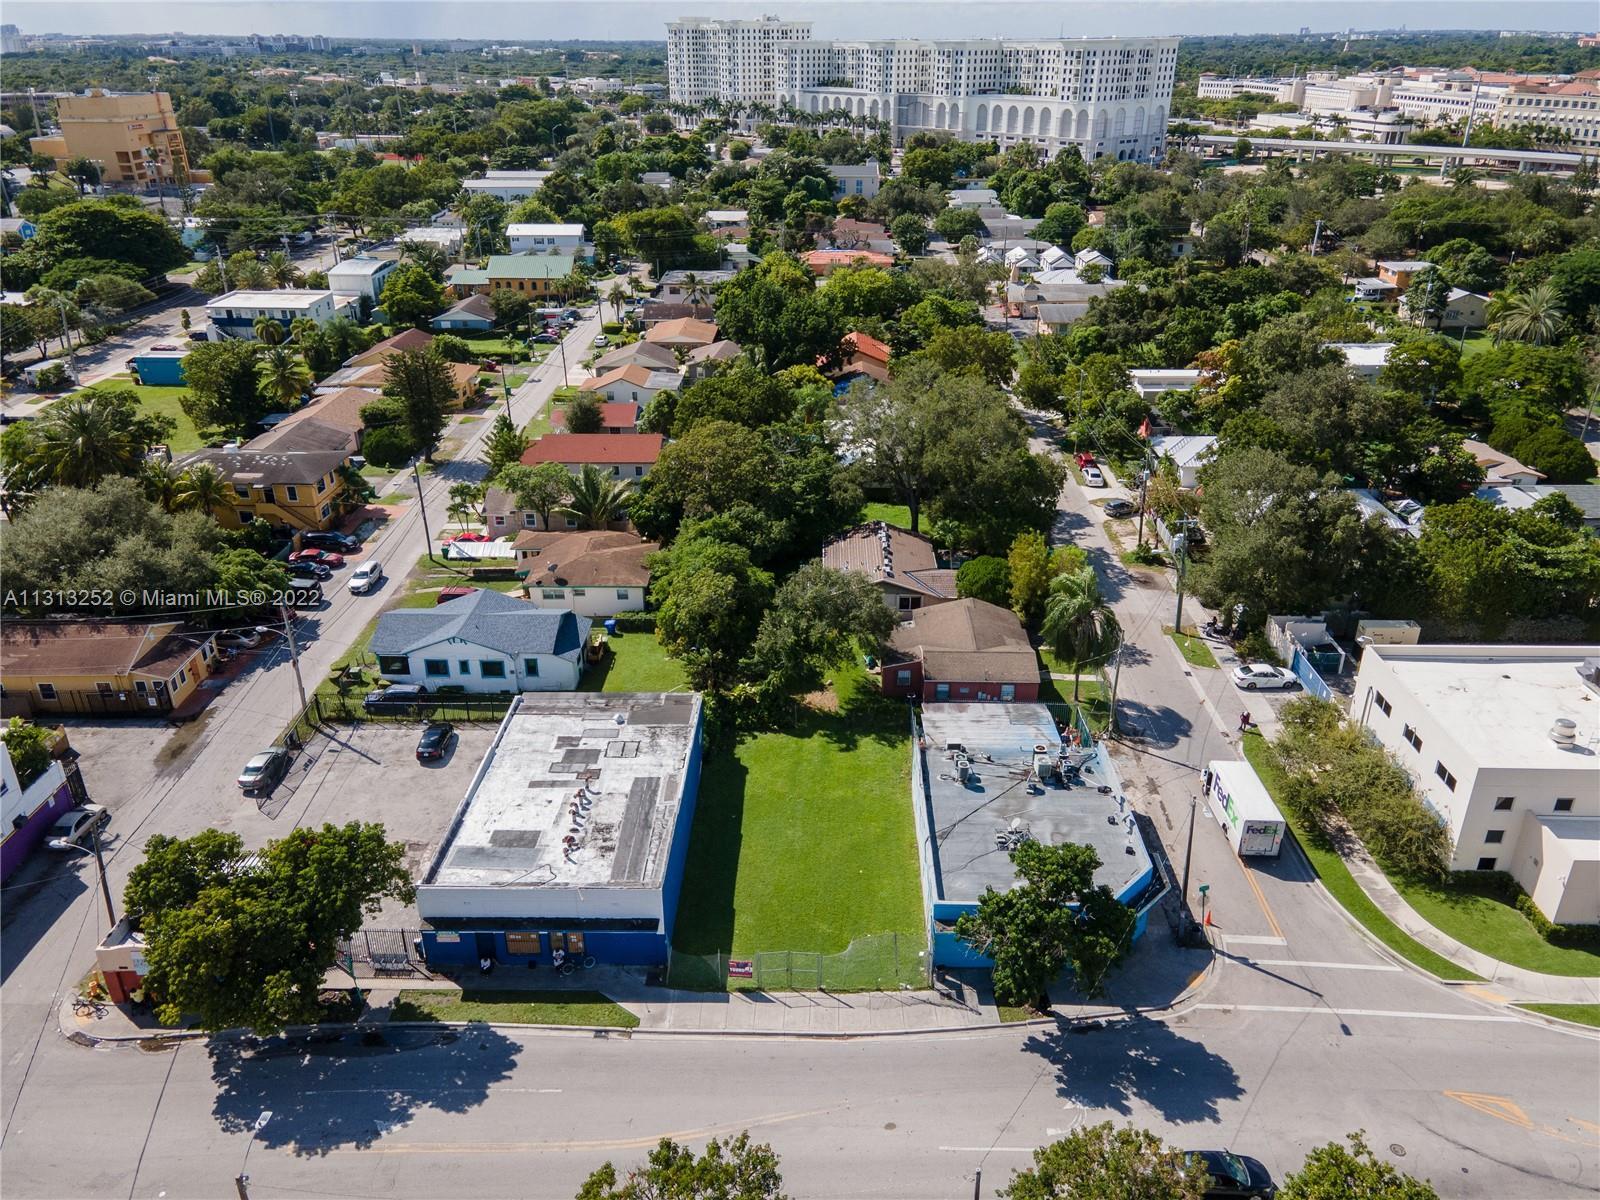 Photo of 3710 Frow Ave in Miami, FL